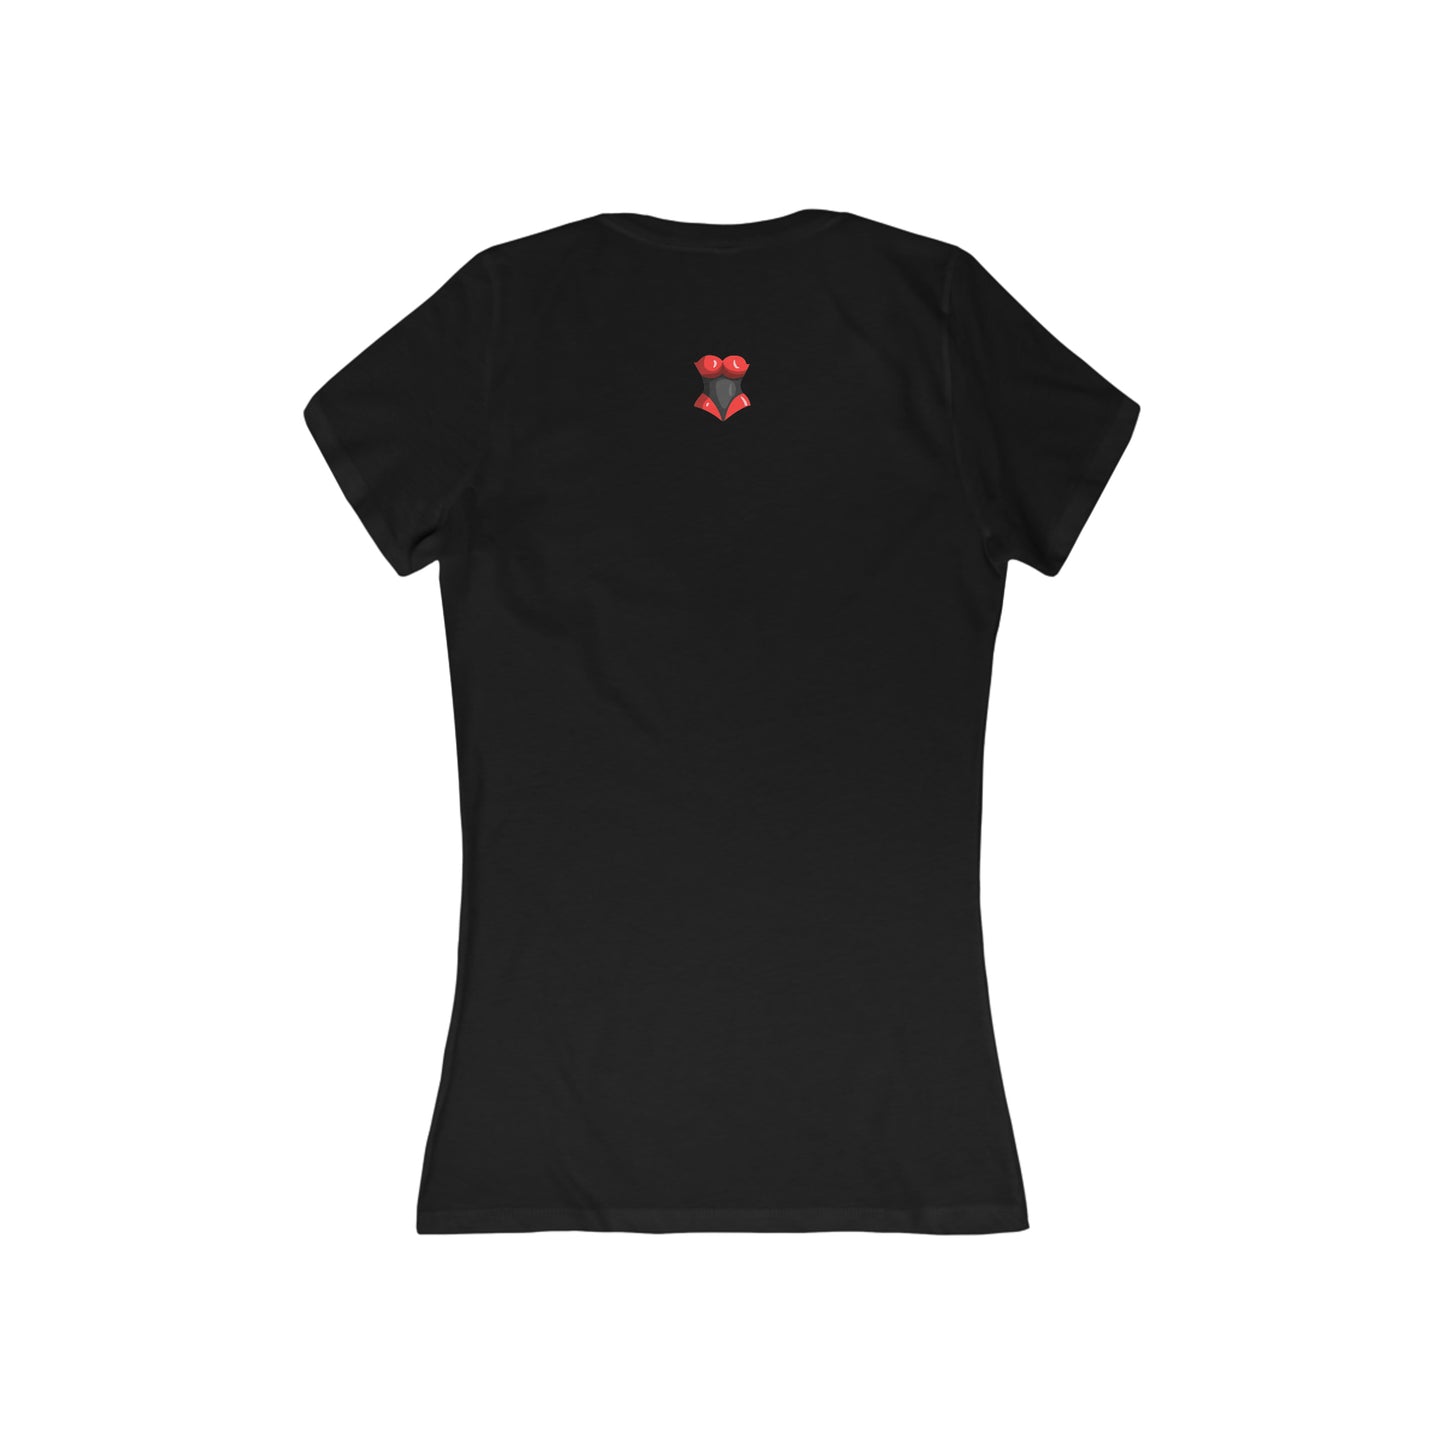 The Dominant Smile | Fitted V-Neck Tee